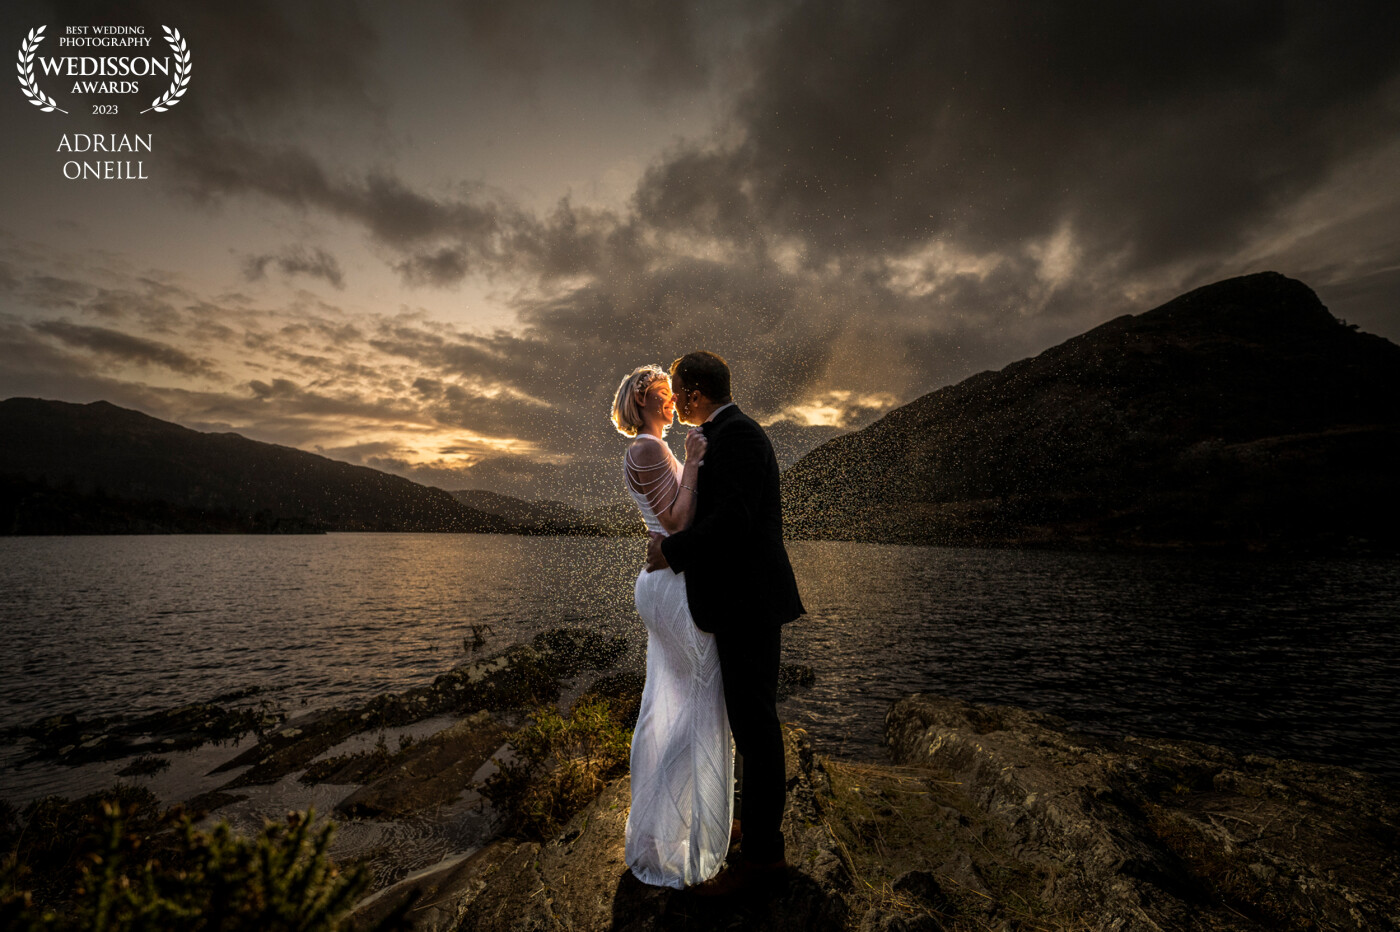 Catching the last of the winter sun light, helps to know the good spots where you get the last good light. The winter weddings can always be challenging. But having the right couple in the right location its pure magic.